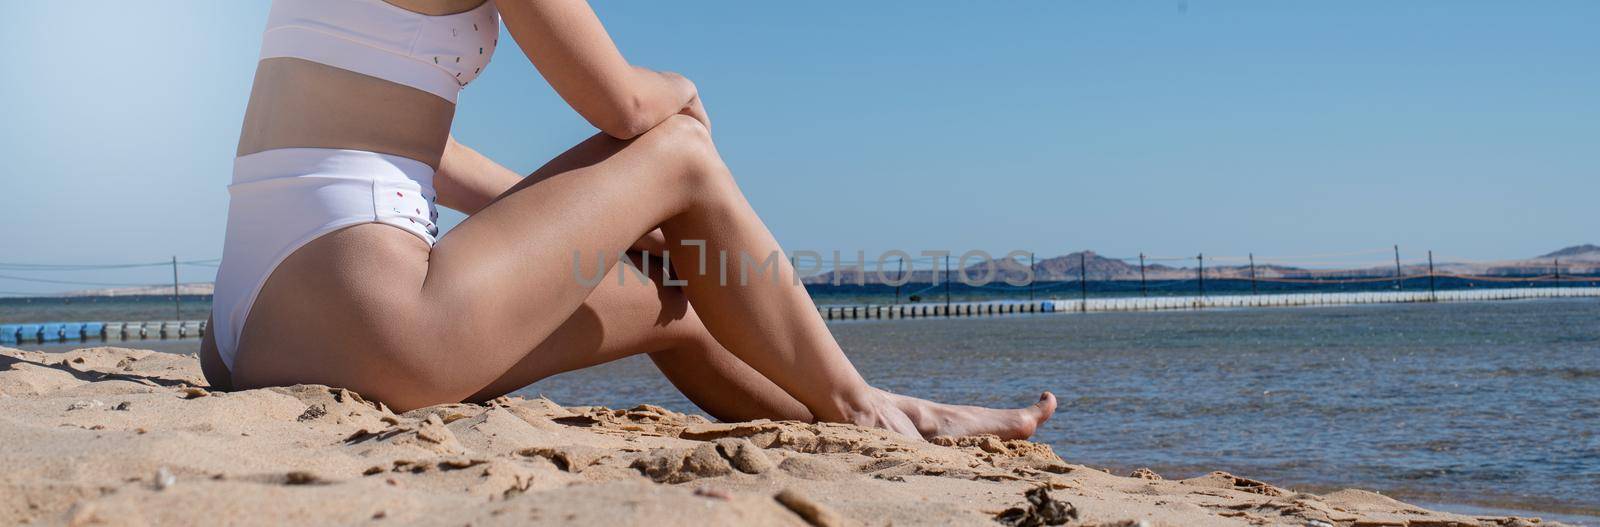 Fit sexy attractive woman sitting on the beach sunbathing by Desperada